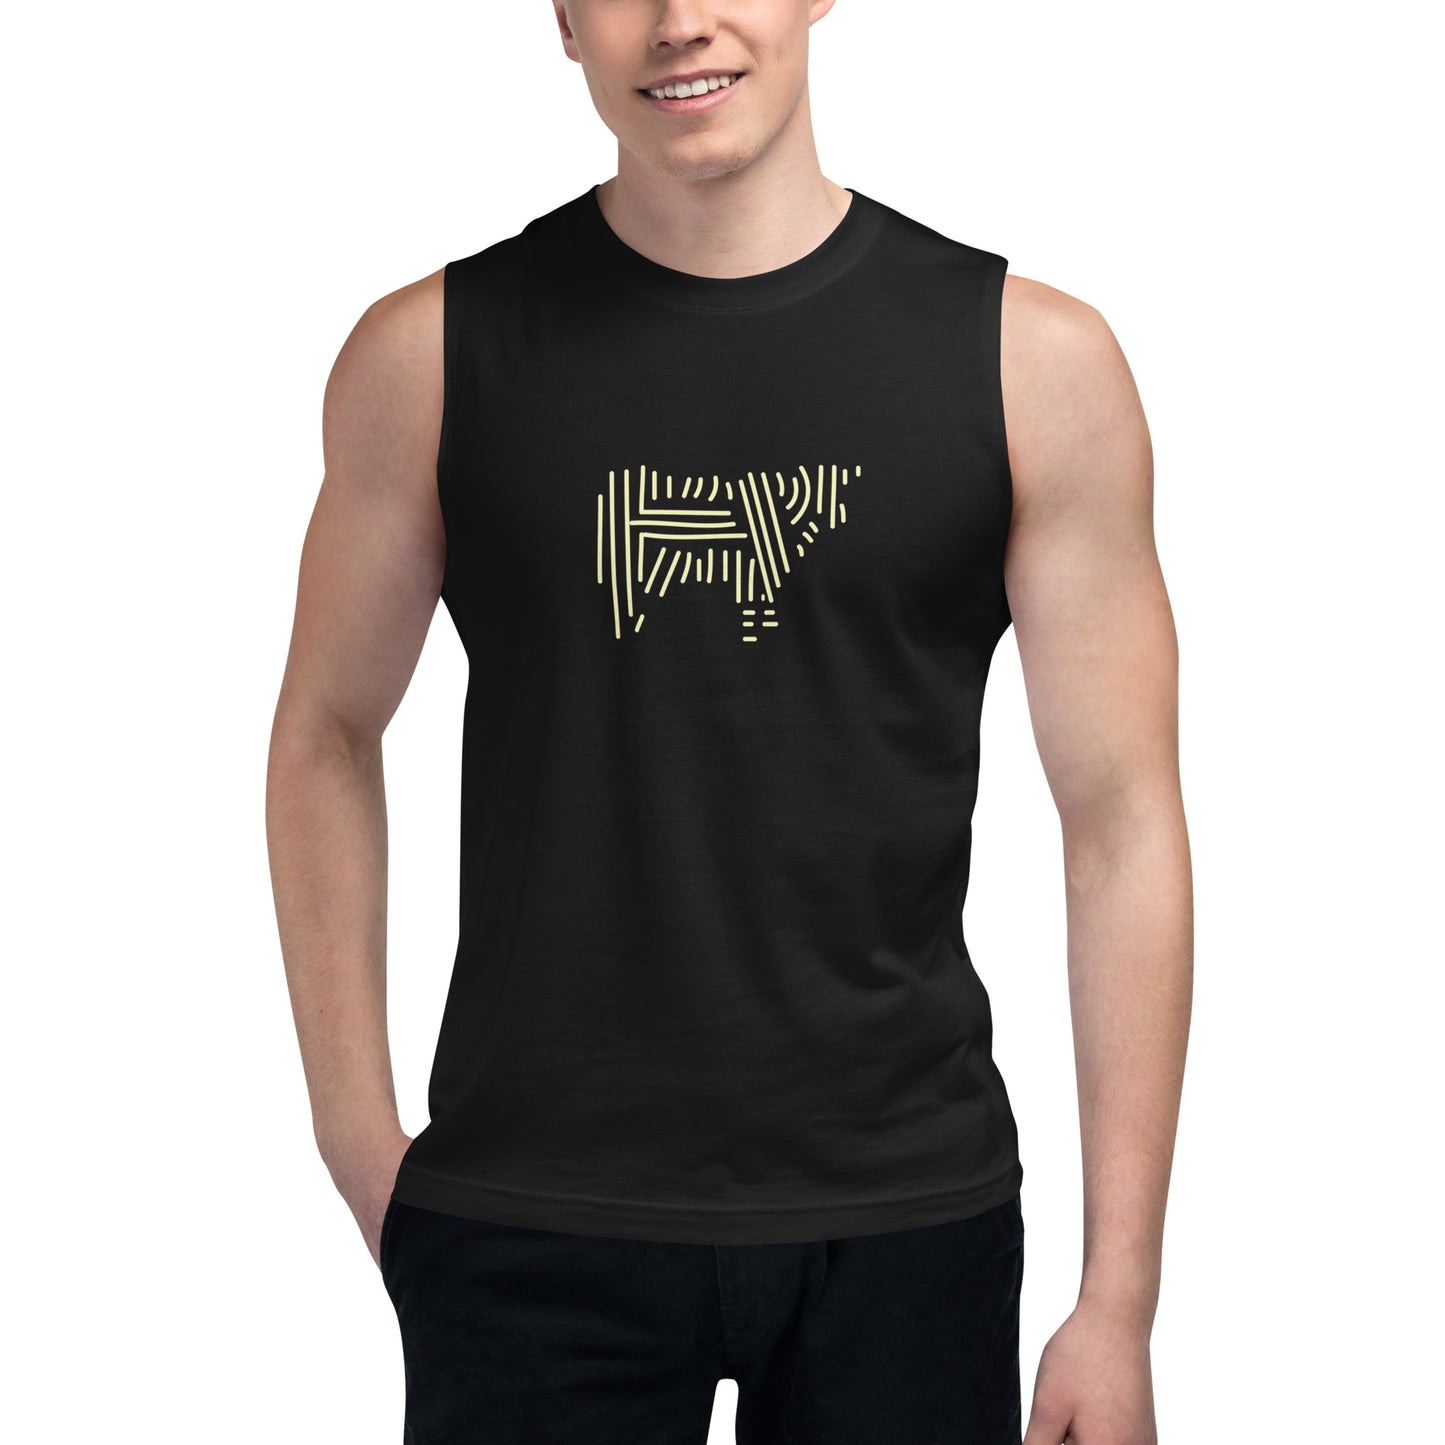 HOLY COW Muscle Shirt